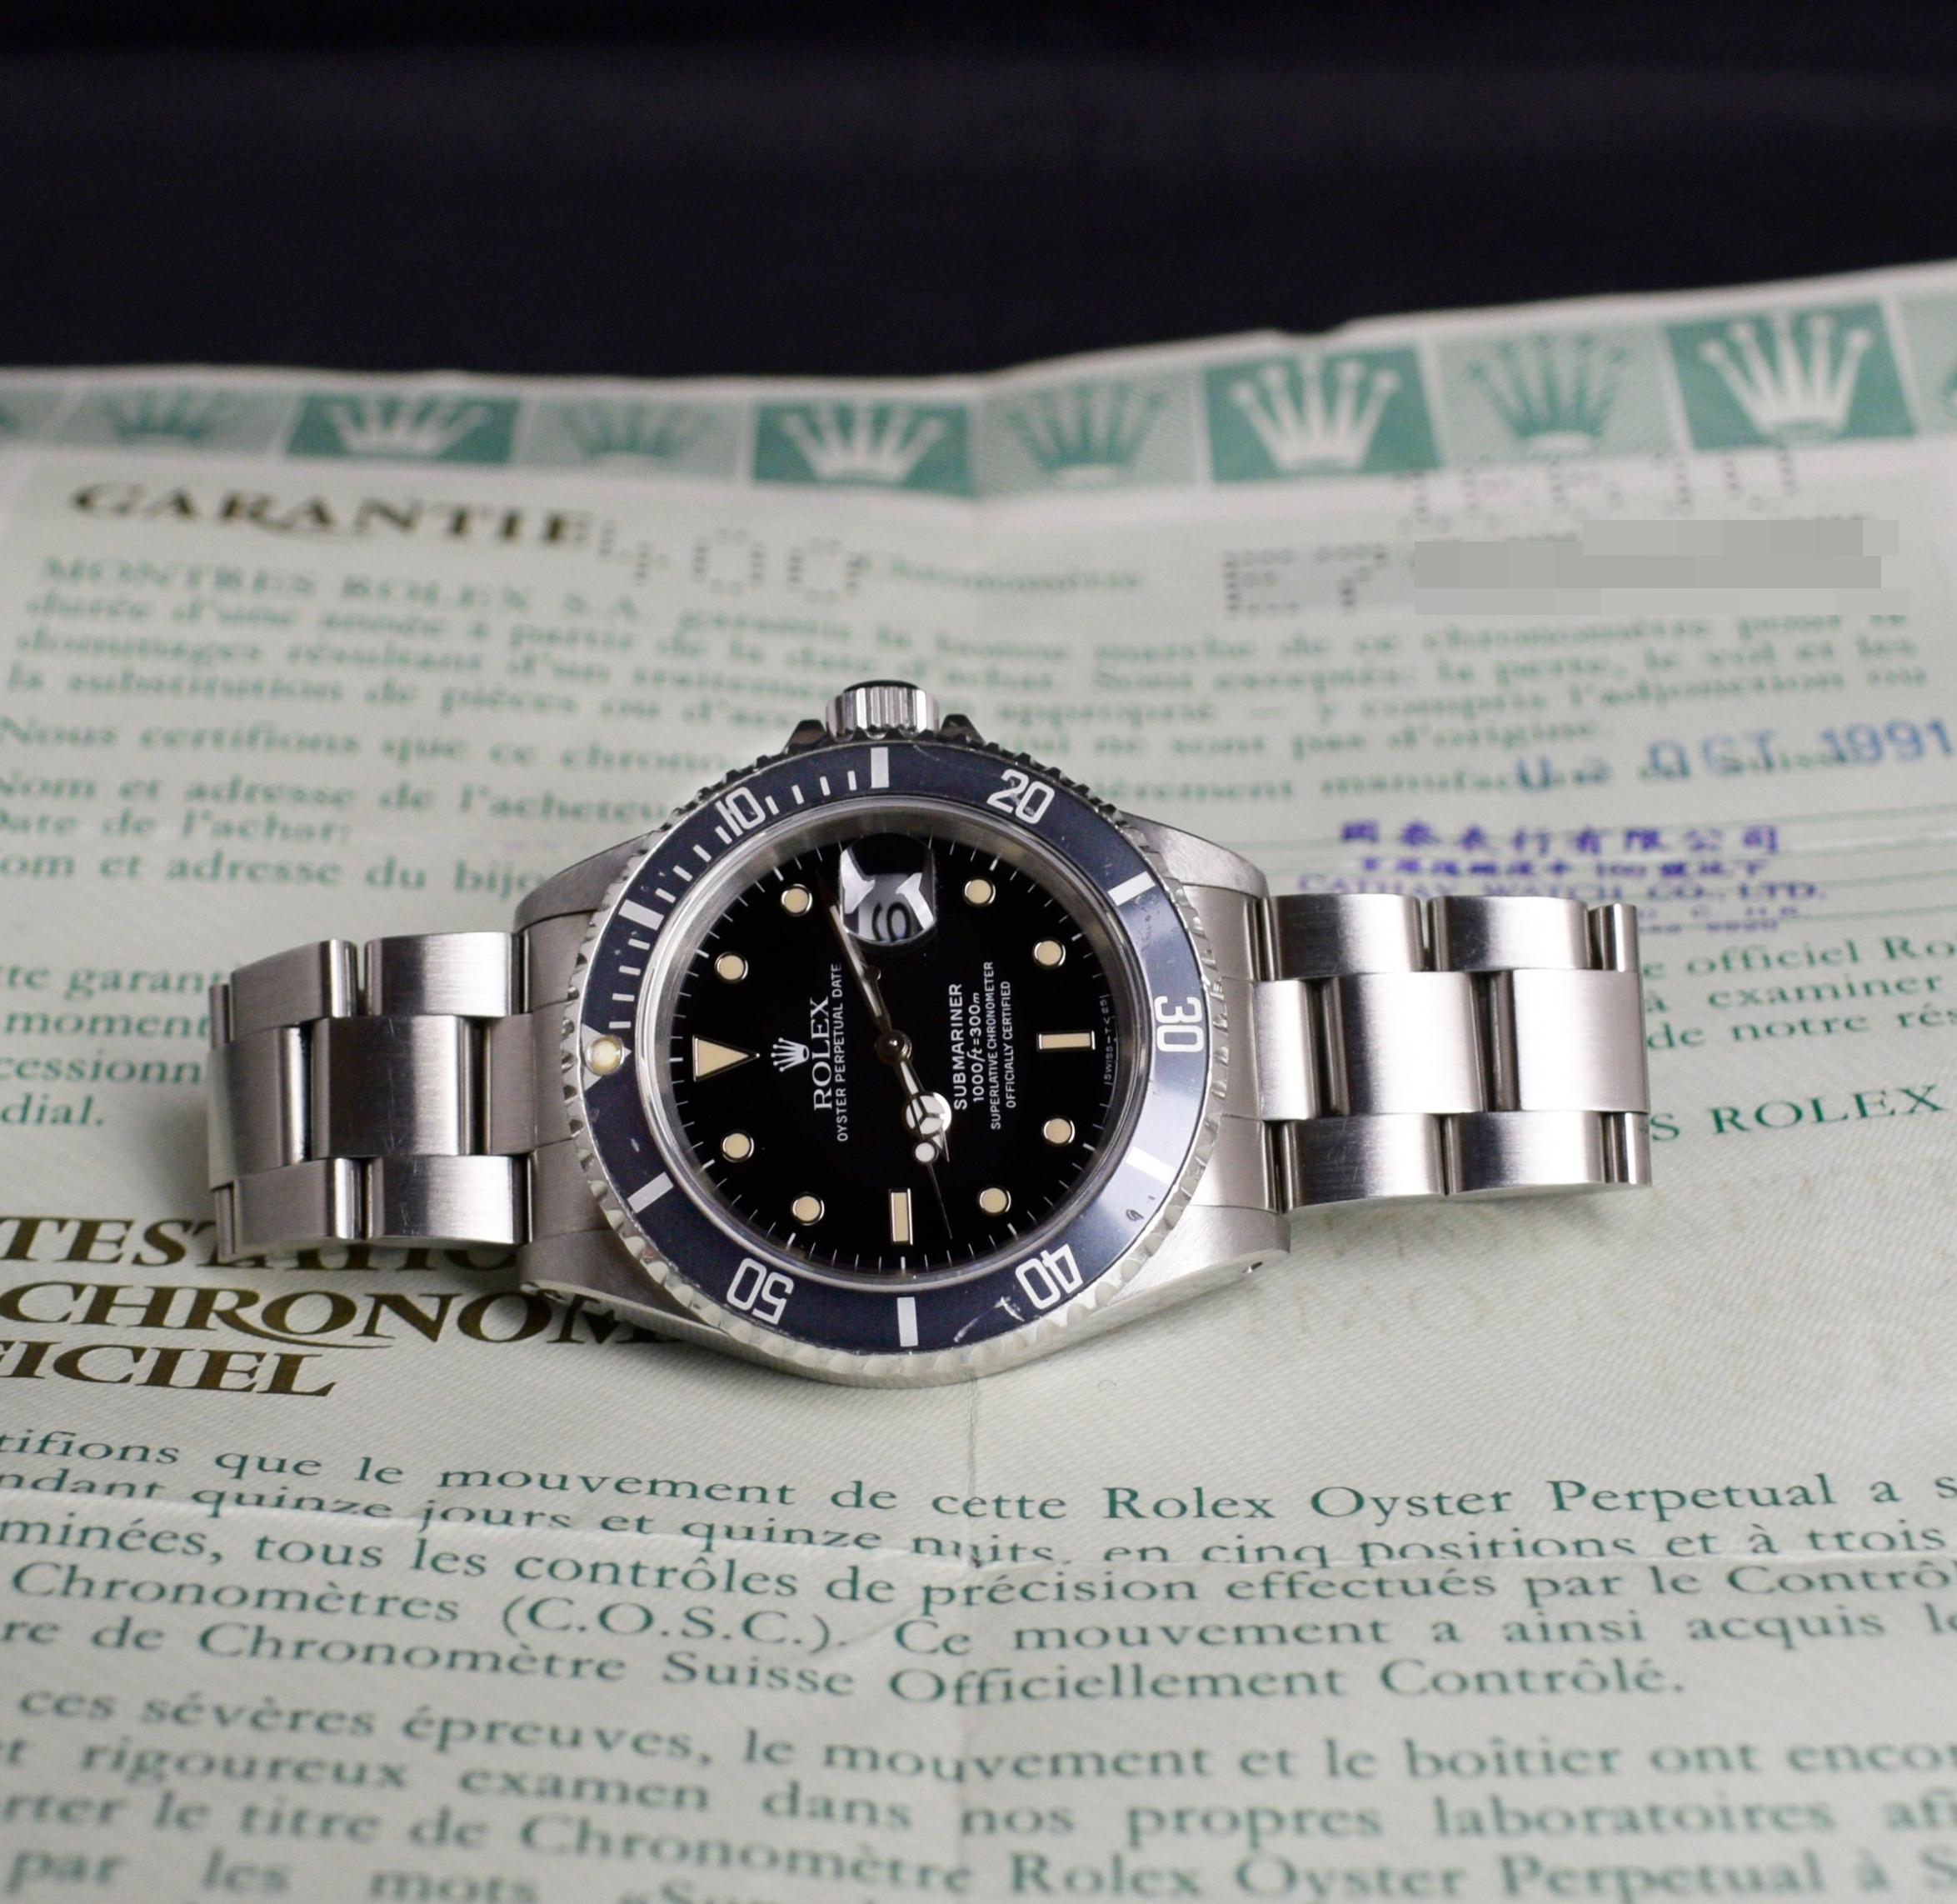 Brand: Rolex
Model: 16610
Year: 1990
Serial number: E7xxxxx
Reference: C03537

Case: Show sign of wear with slight polish from previous; inner case back stamped 16610

Dial: Excellent Condition Black Dial w/ matching hands

Bracelet: 93150 Oyster